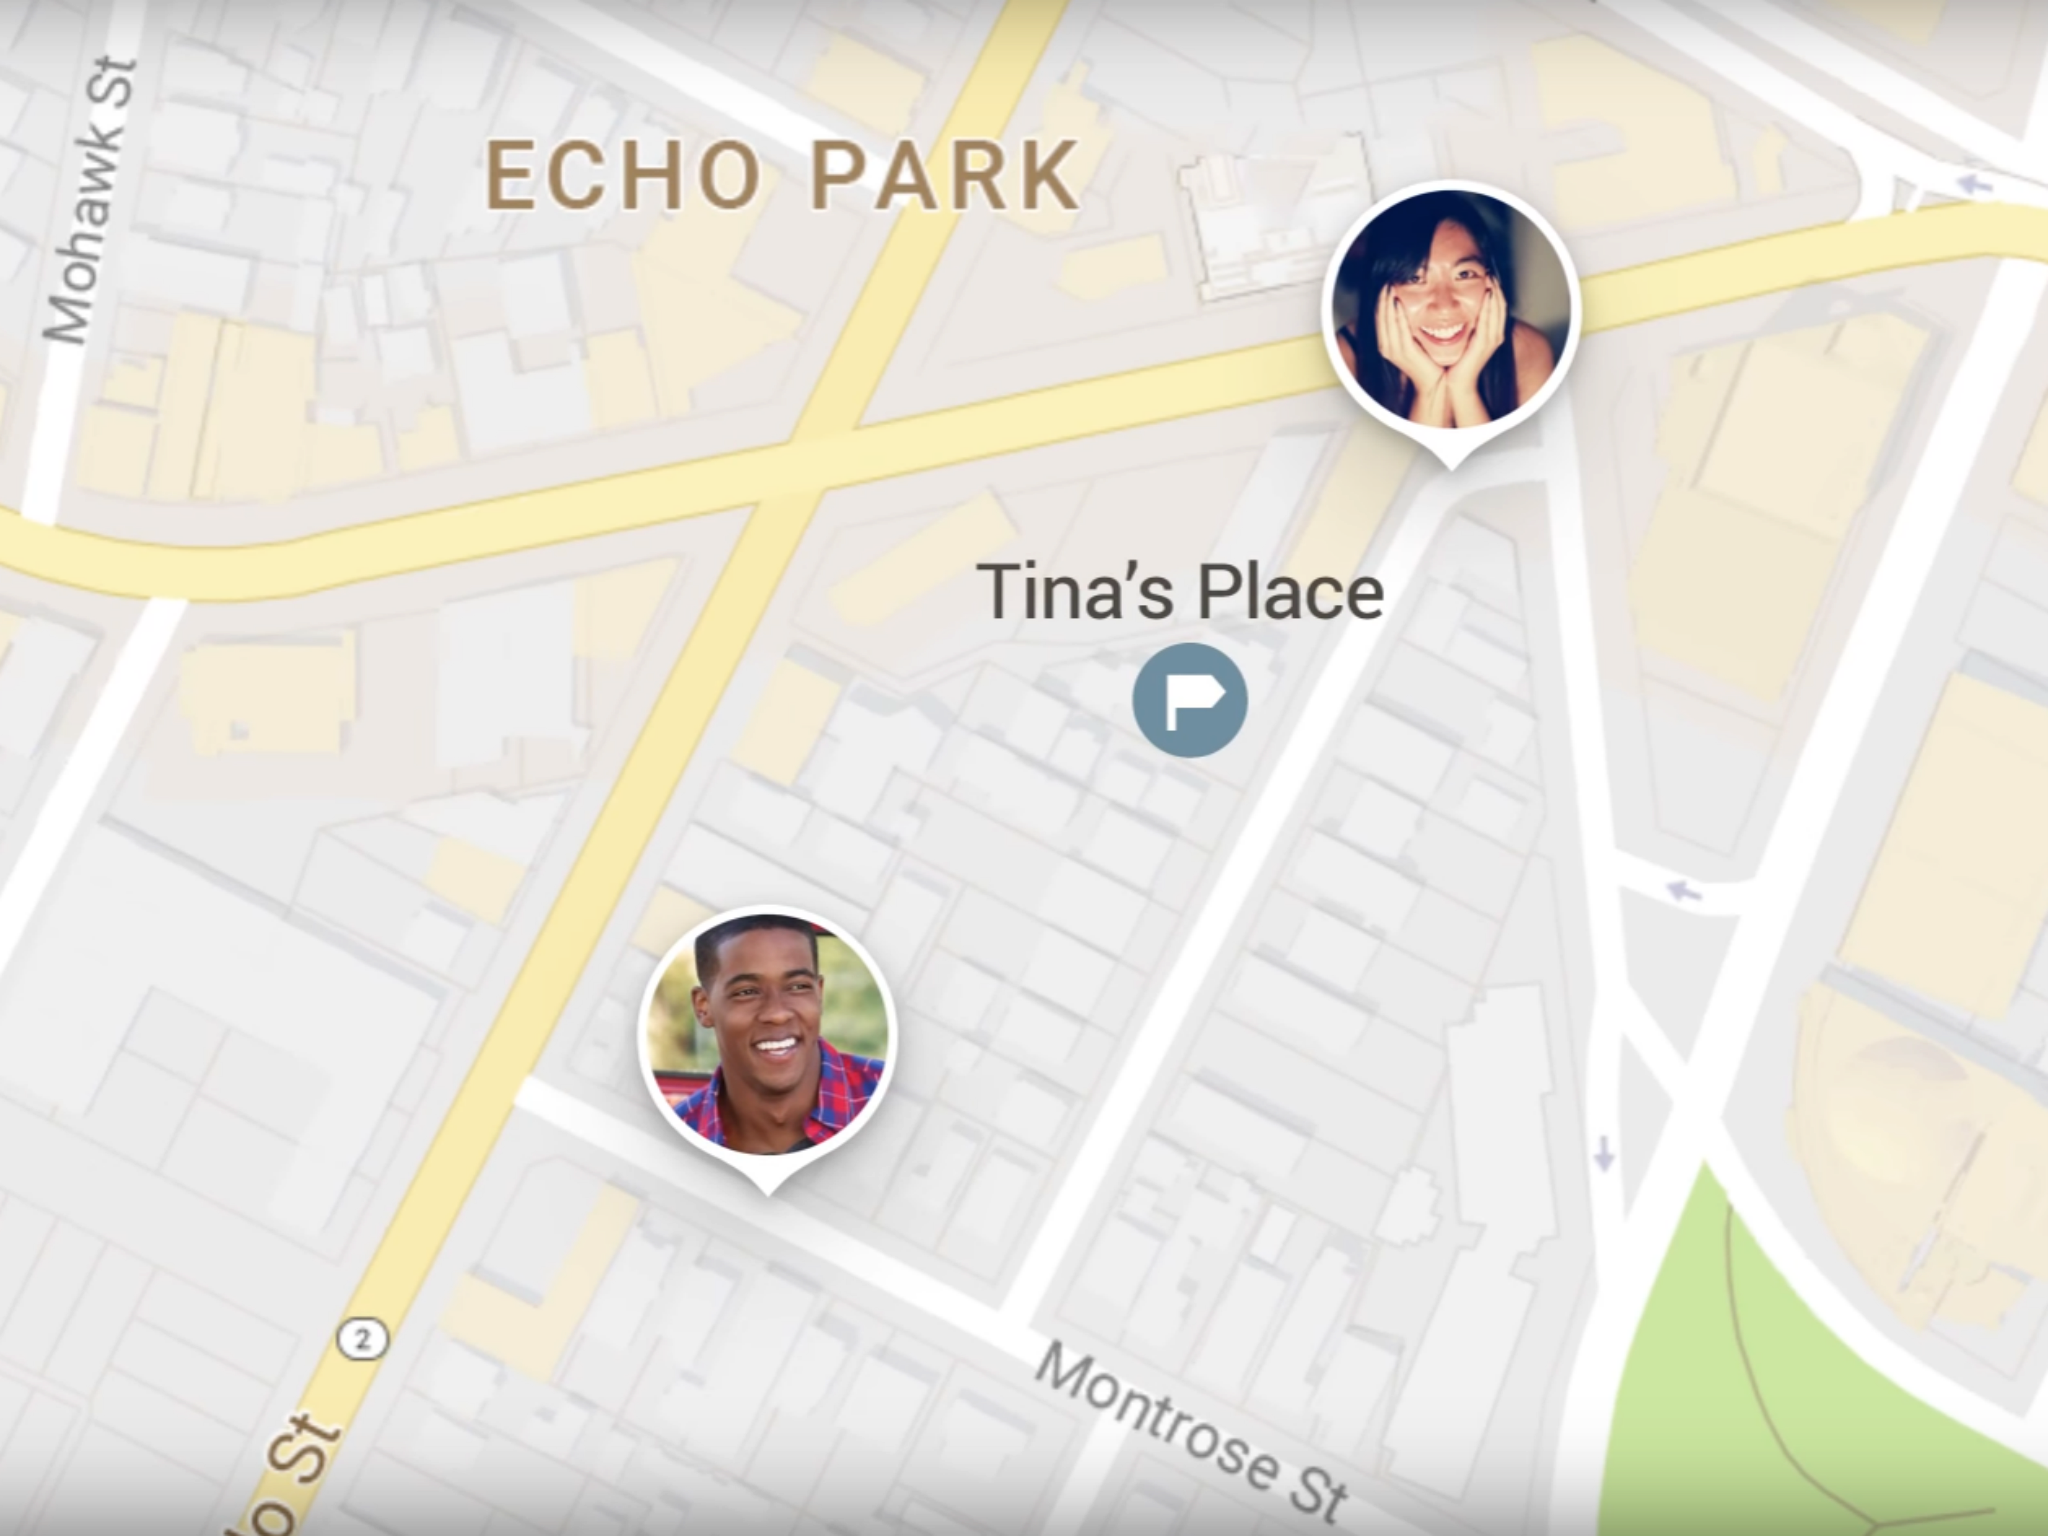 You can share your location with your contacts, but people you don't know can also gain access to the data